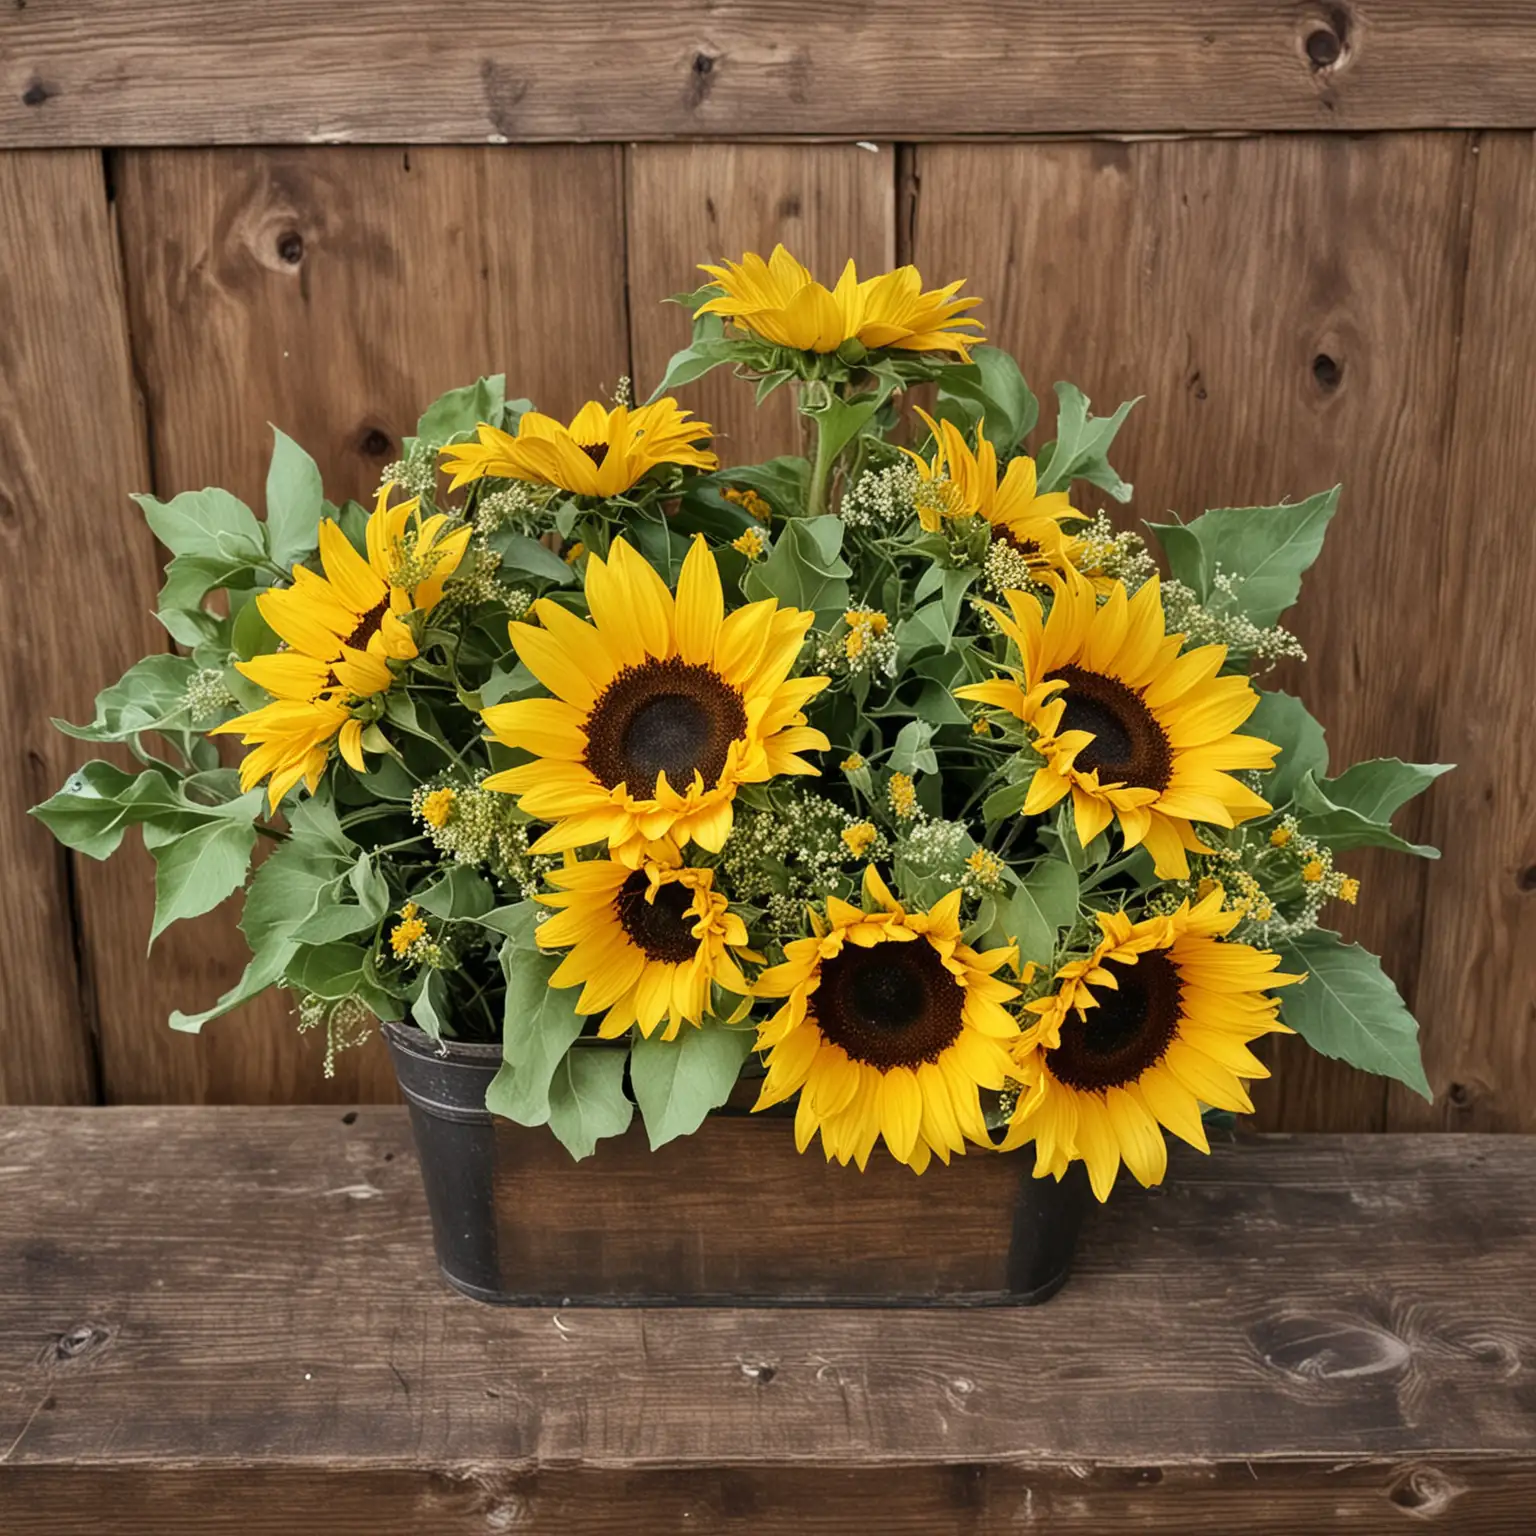 Rustic-Sunflower-Centerpiece-Charming-Floral-Arrangement-in-a-Rustic-Container